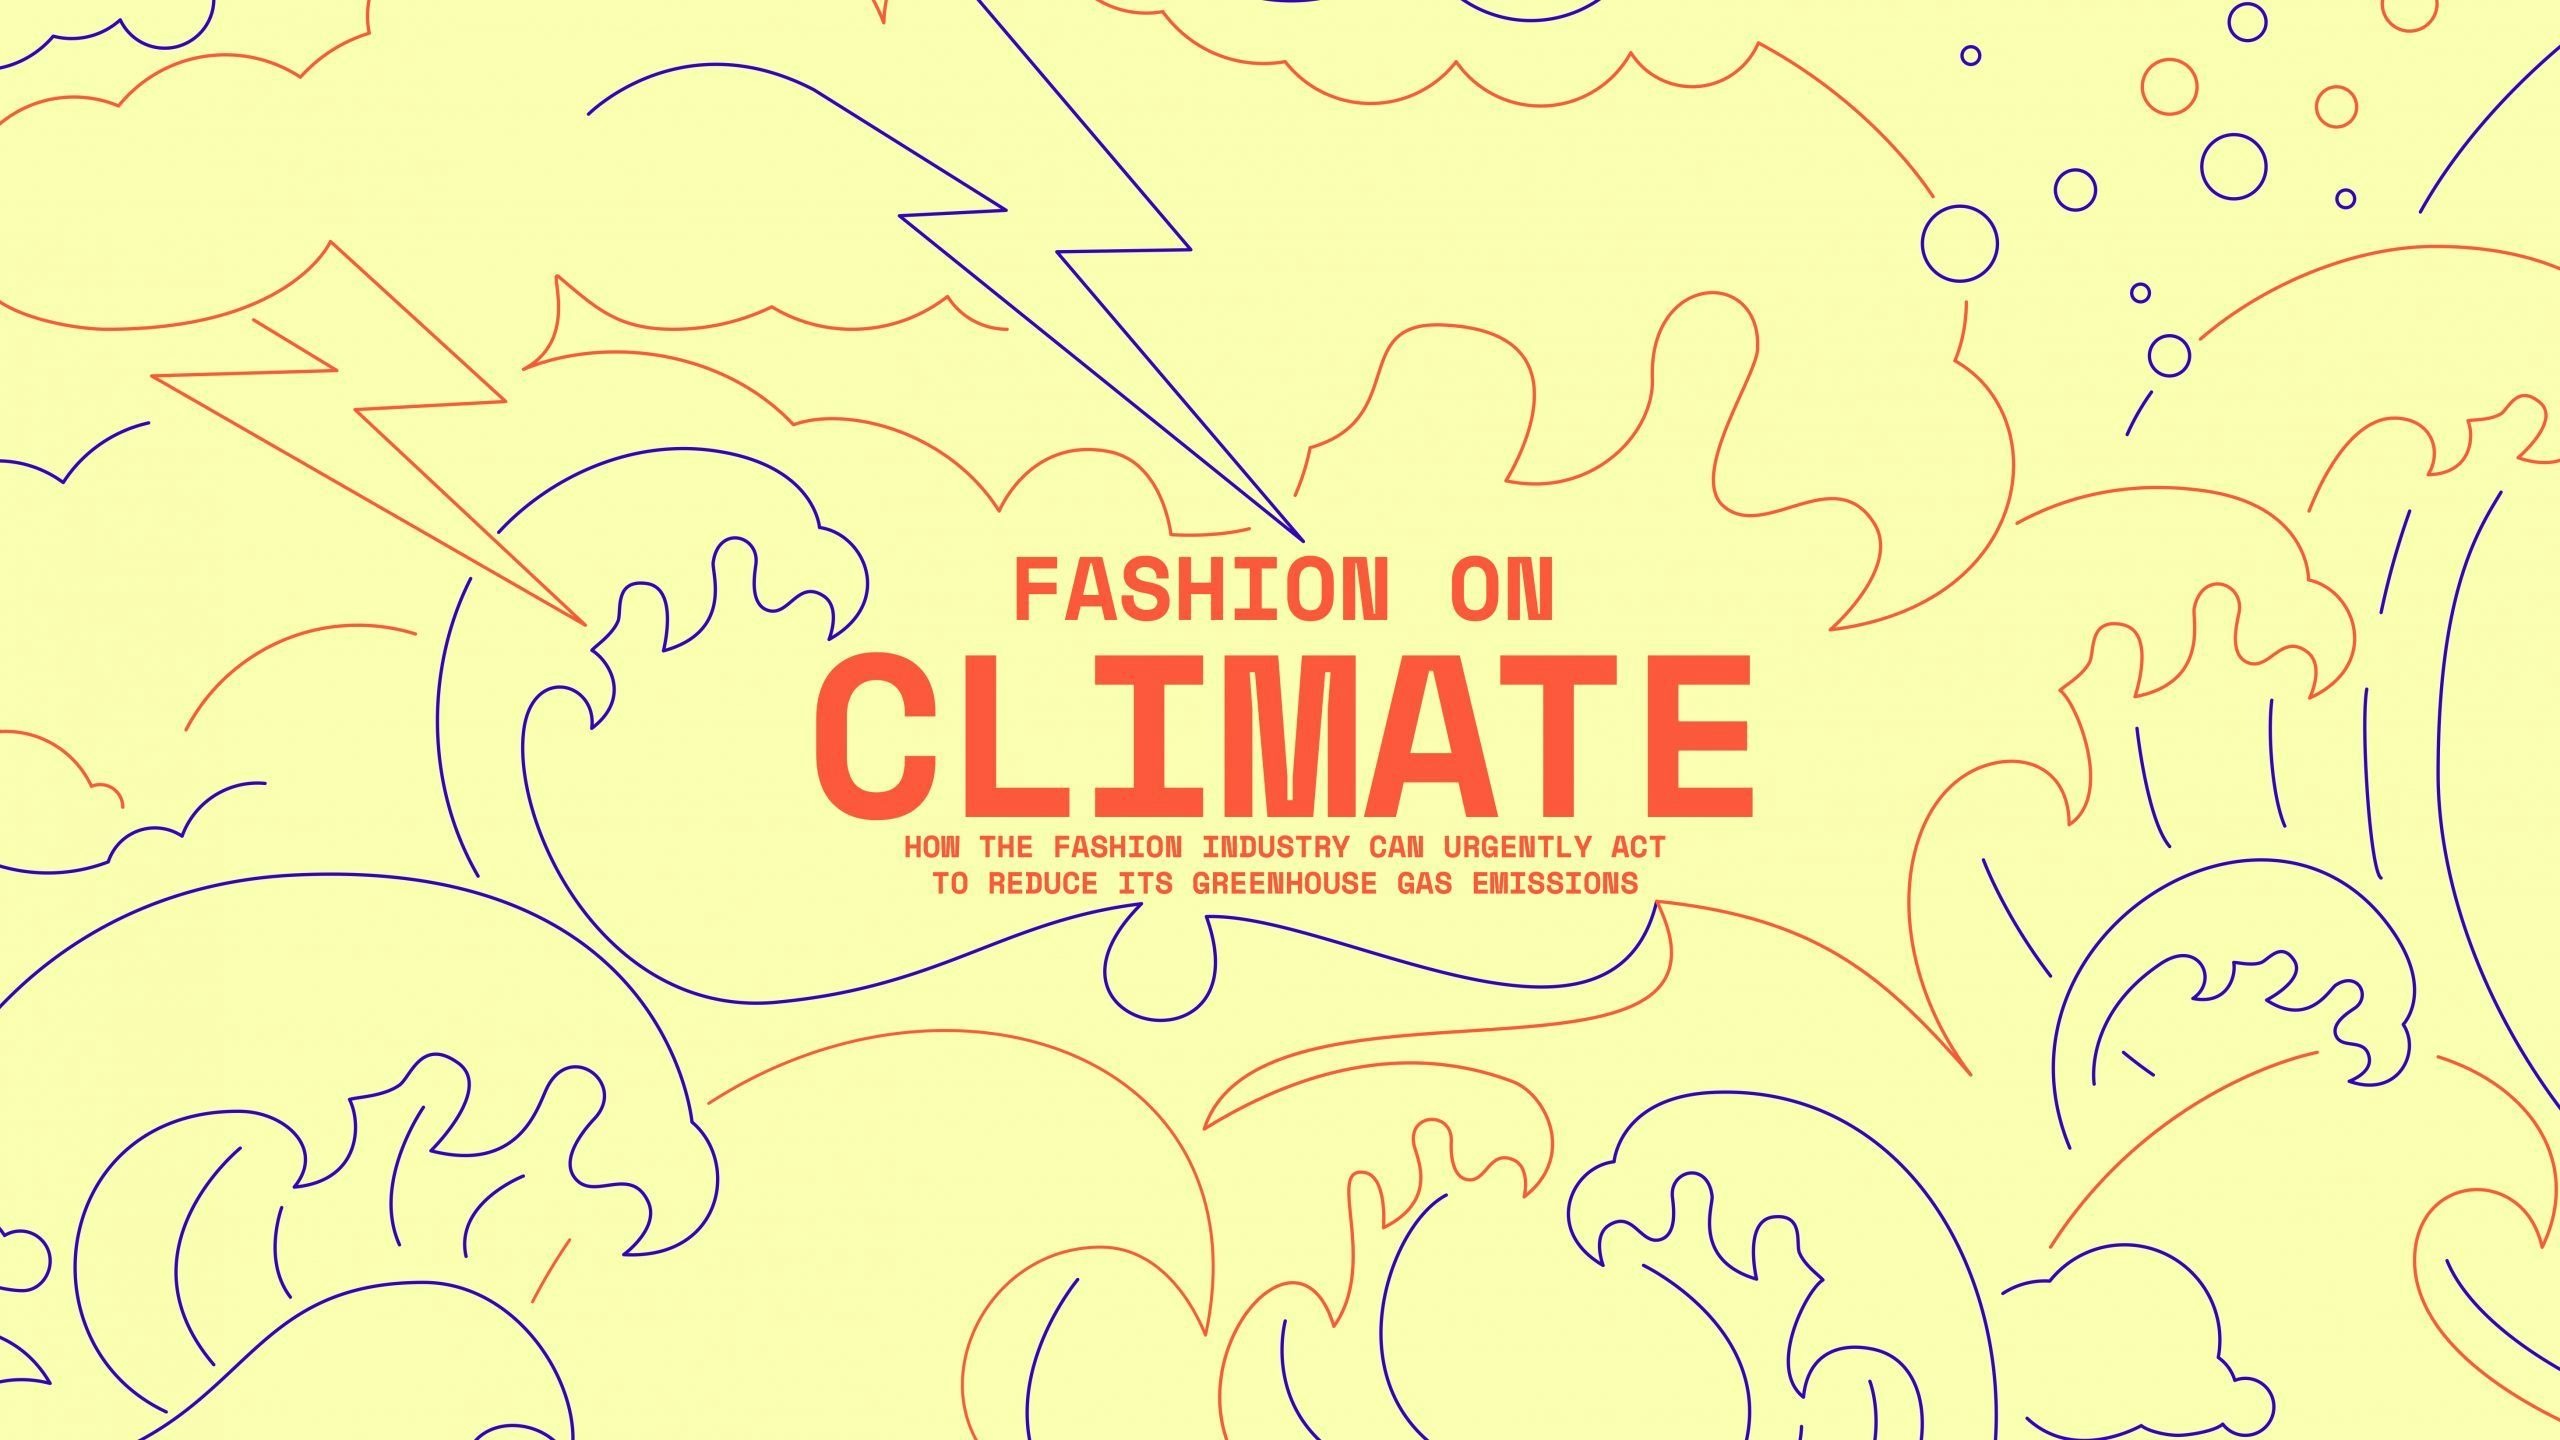 McKinsey: Fashion Industry Actions That Would Slow Climate Change